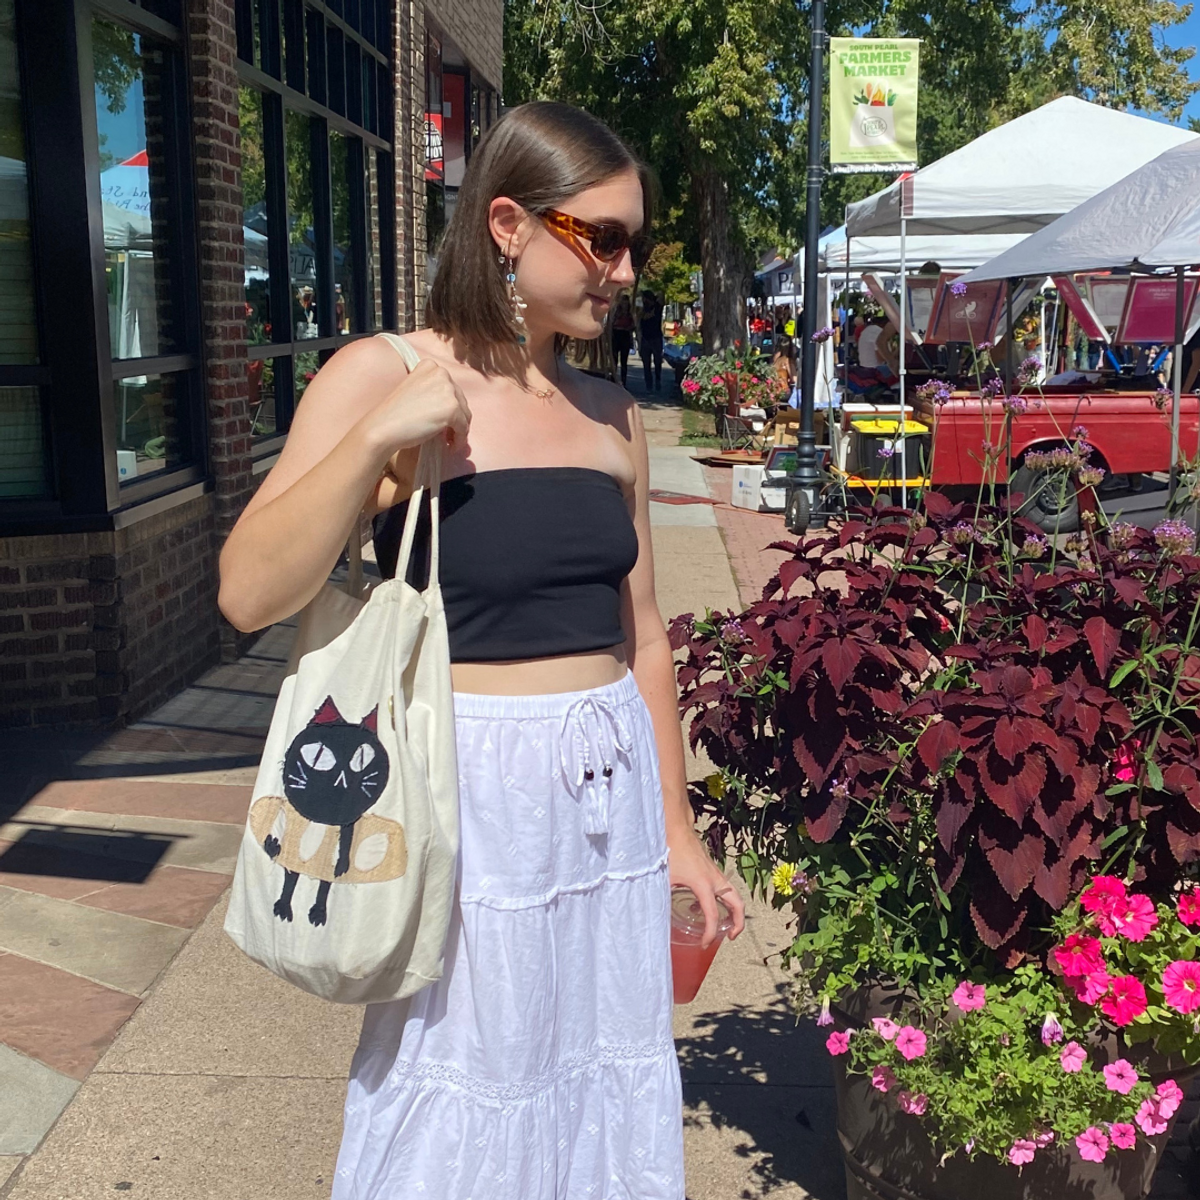 farmers market outfit ideas, what to wear to a farmers market